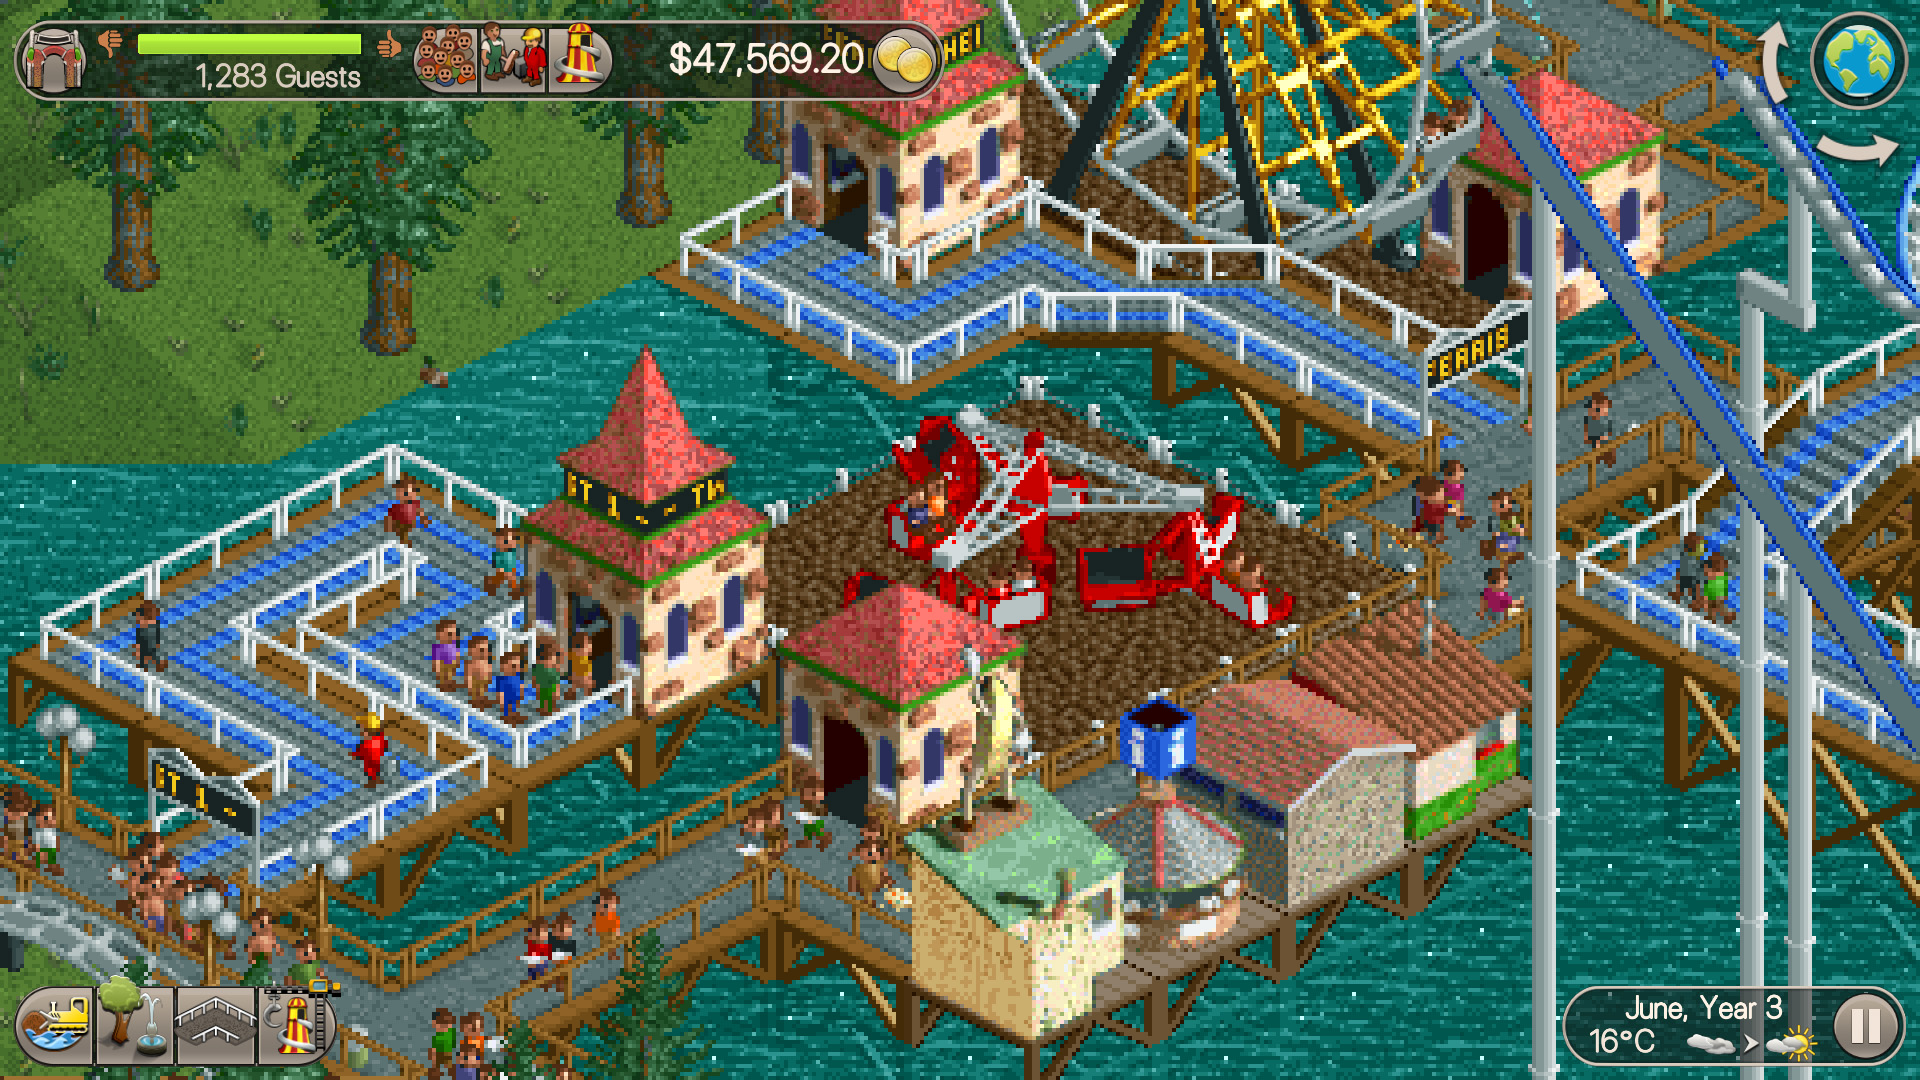 Game tycoon на русском. Rollercoaster Tycoon Classic. Туксон парк аттракционов. Rollercoaster Tycoon 1. My Dragon Tycoon.